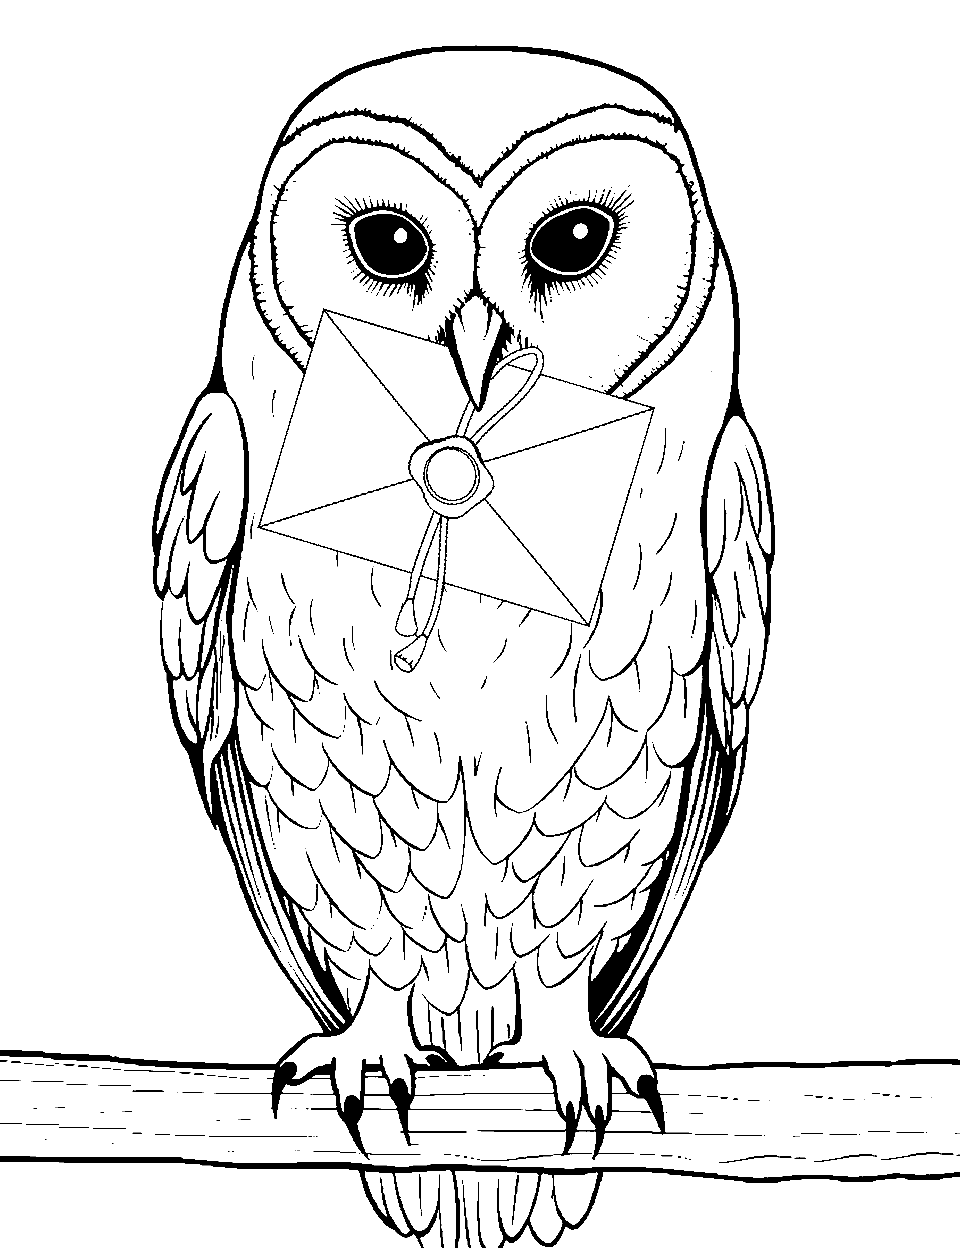 Owl Inspired by Harry Potter Coloring Page - An owl resembling the one from the Harry Potter series, with a letter in its beak.